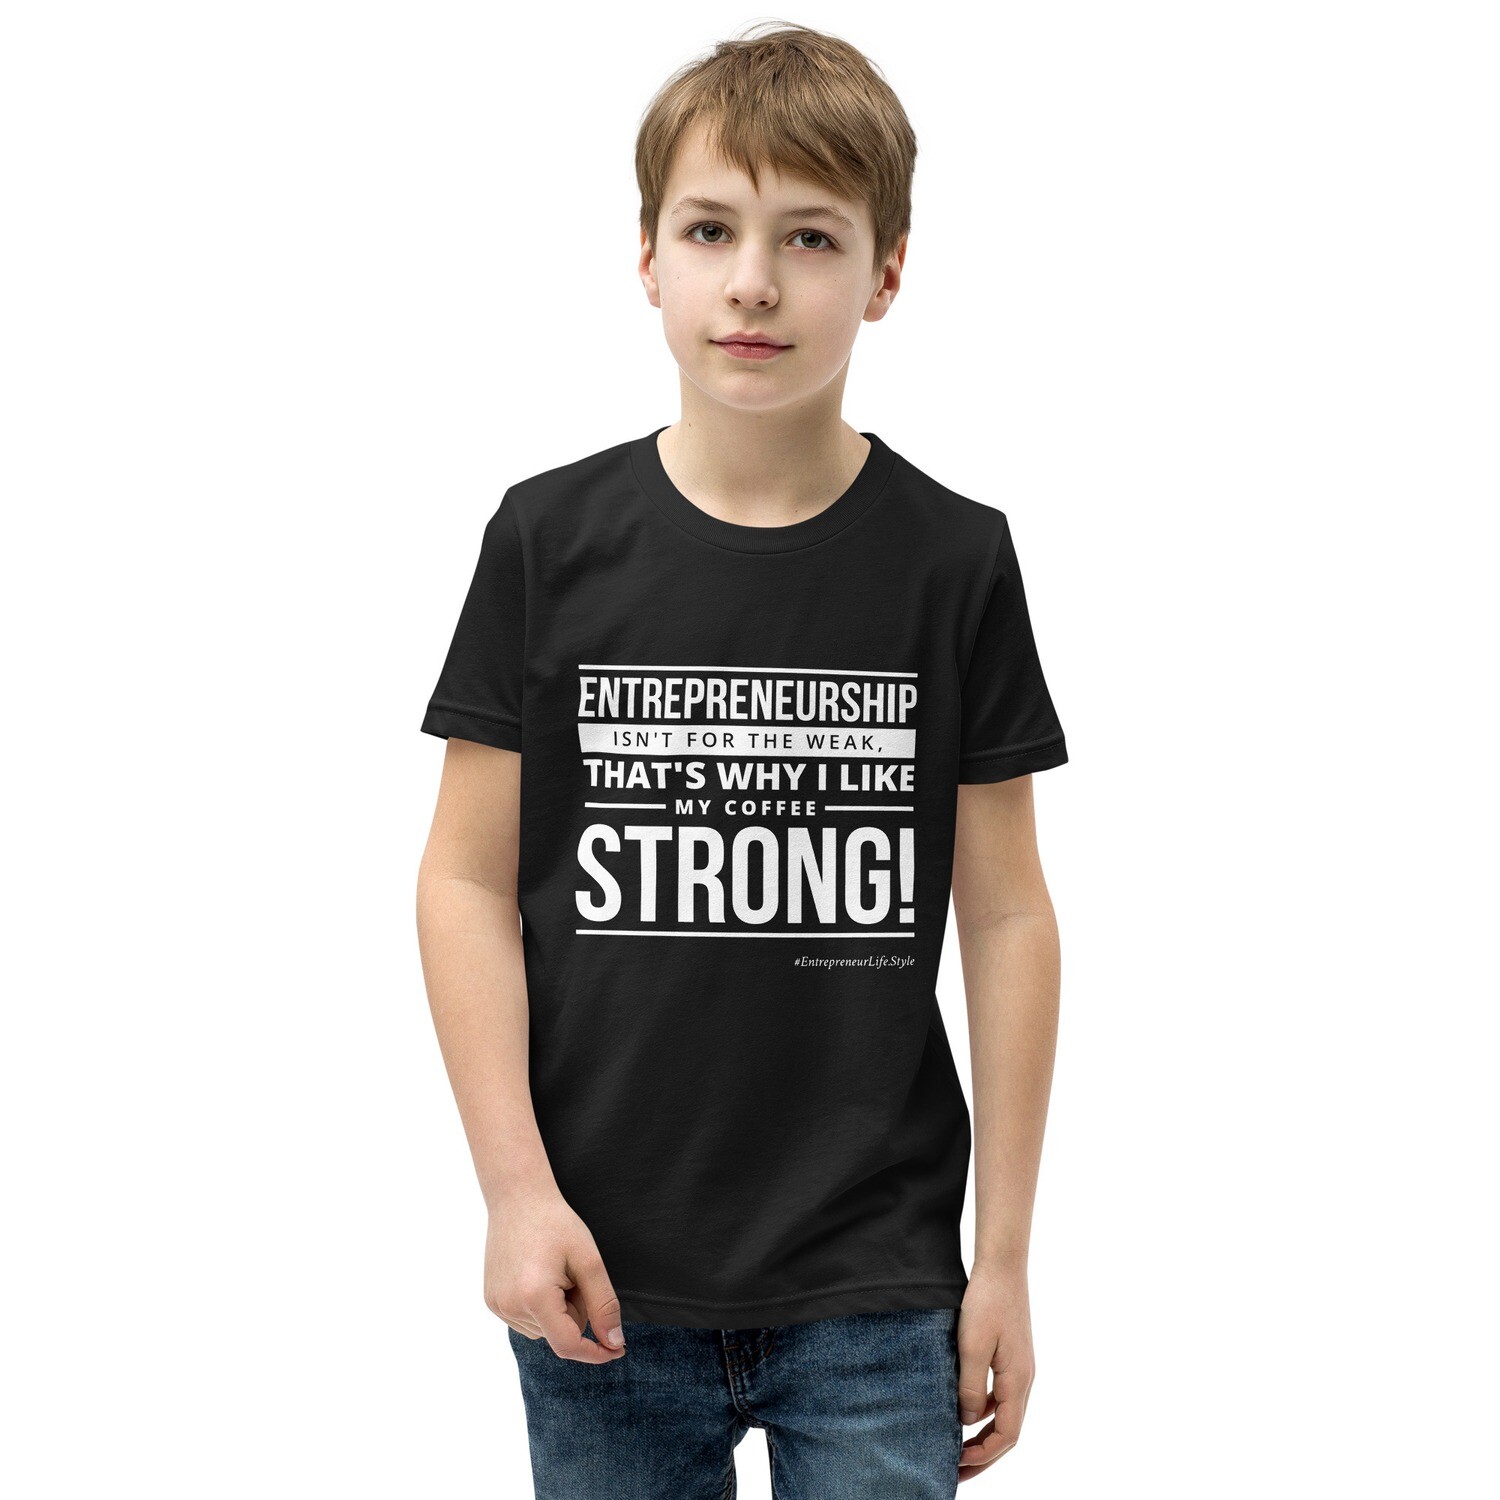 I Like My Coffee Strong - Youth T-Shirt